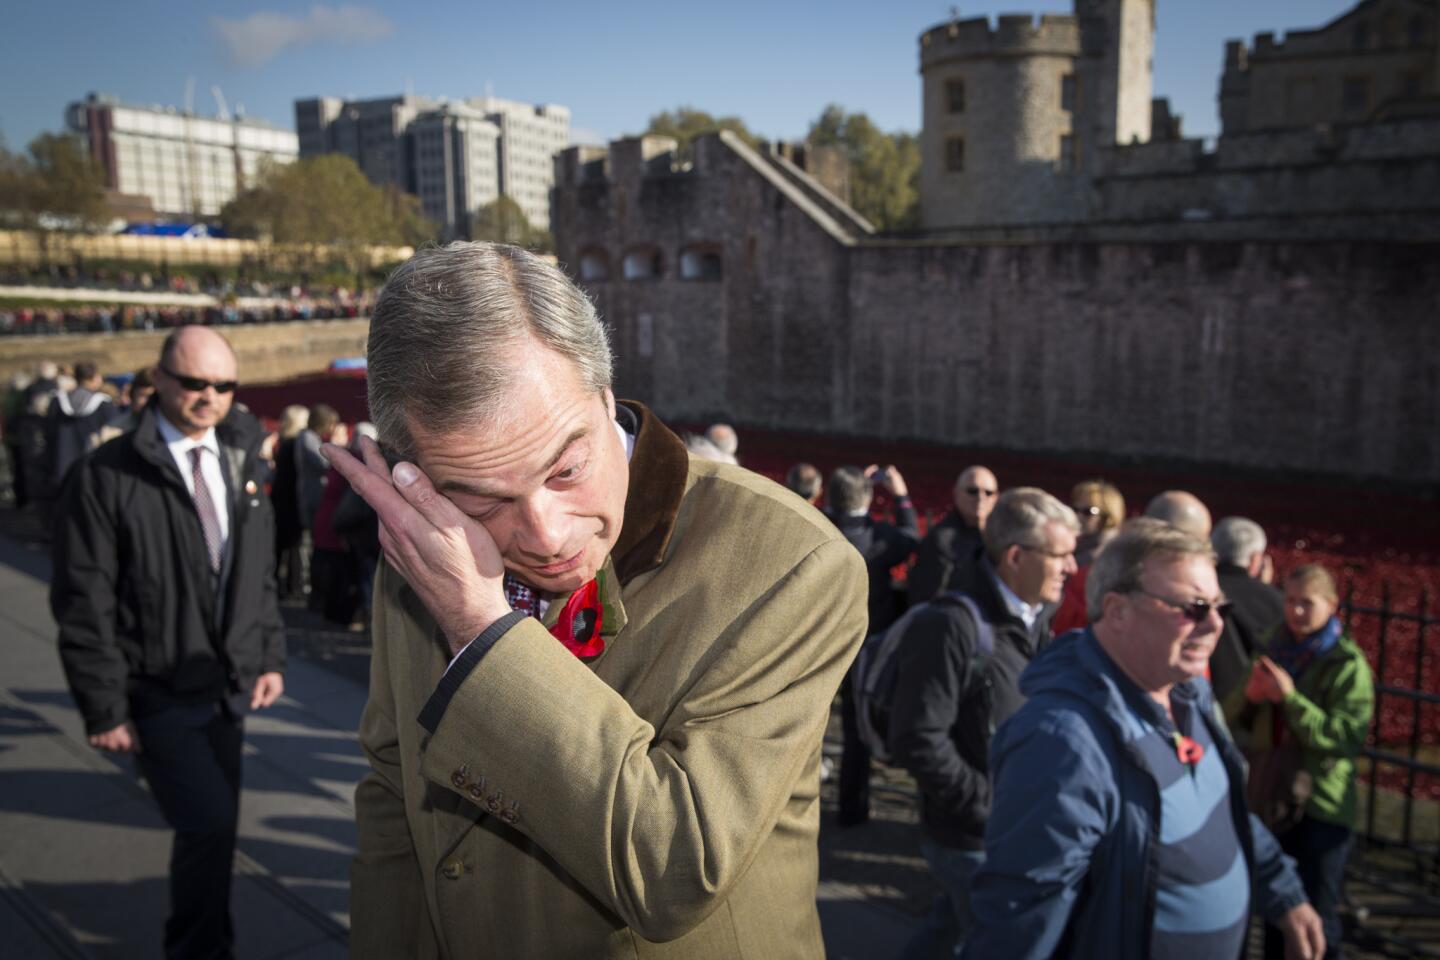 Britain's Remembrance Day